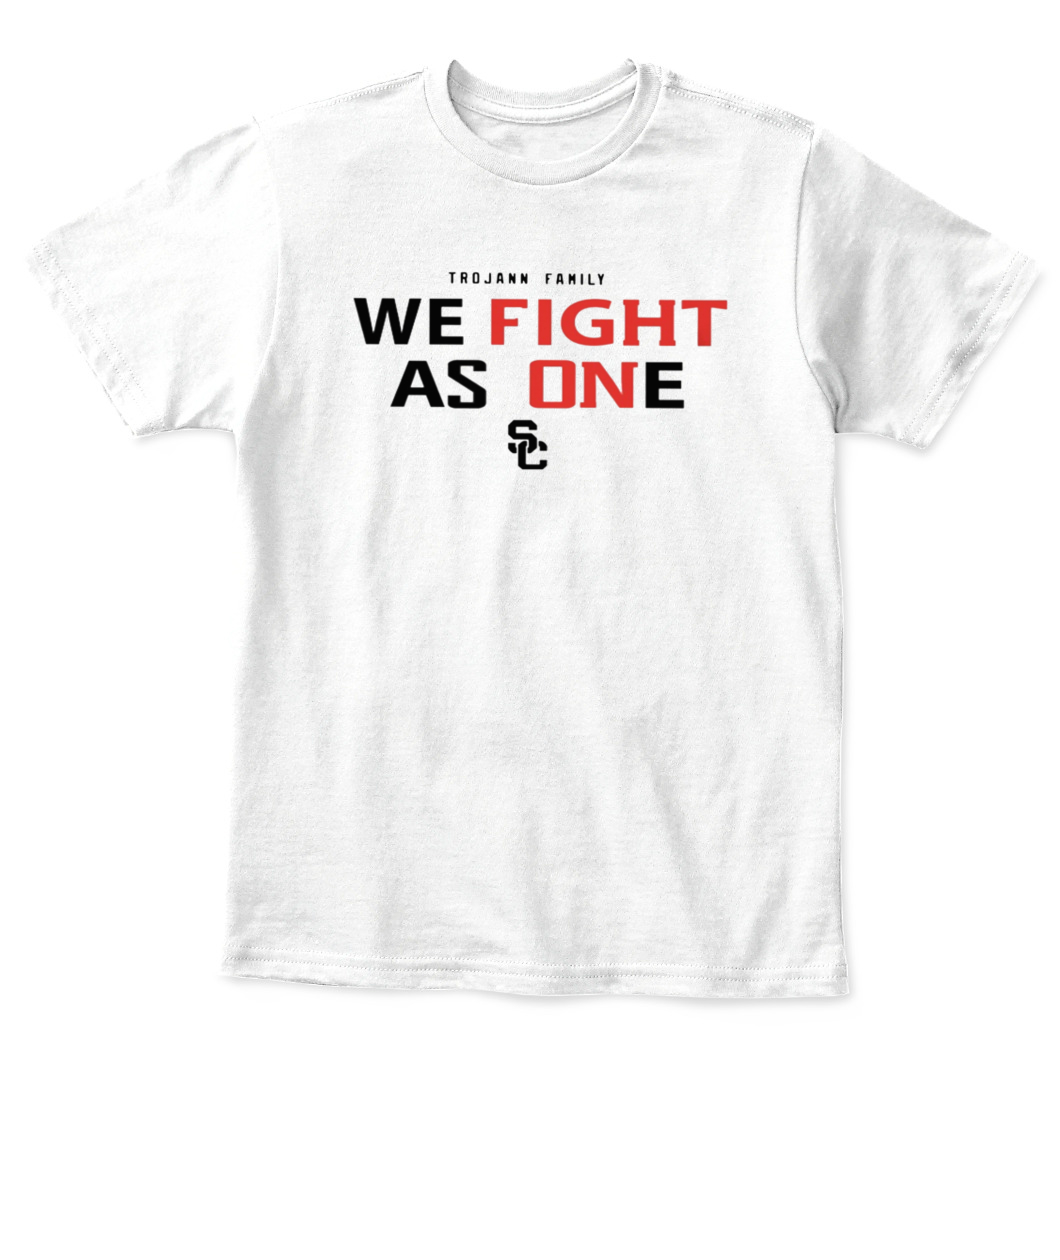 WE FIGHT AS ONE T-SHIRT - Ellie Shirt